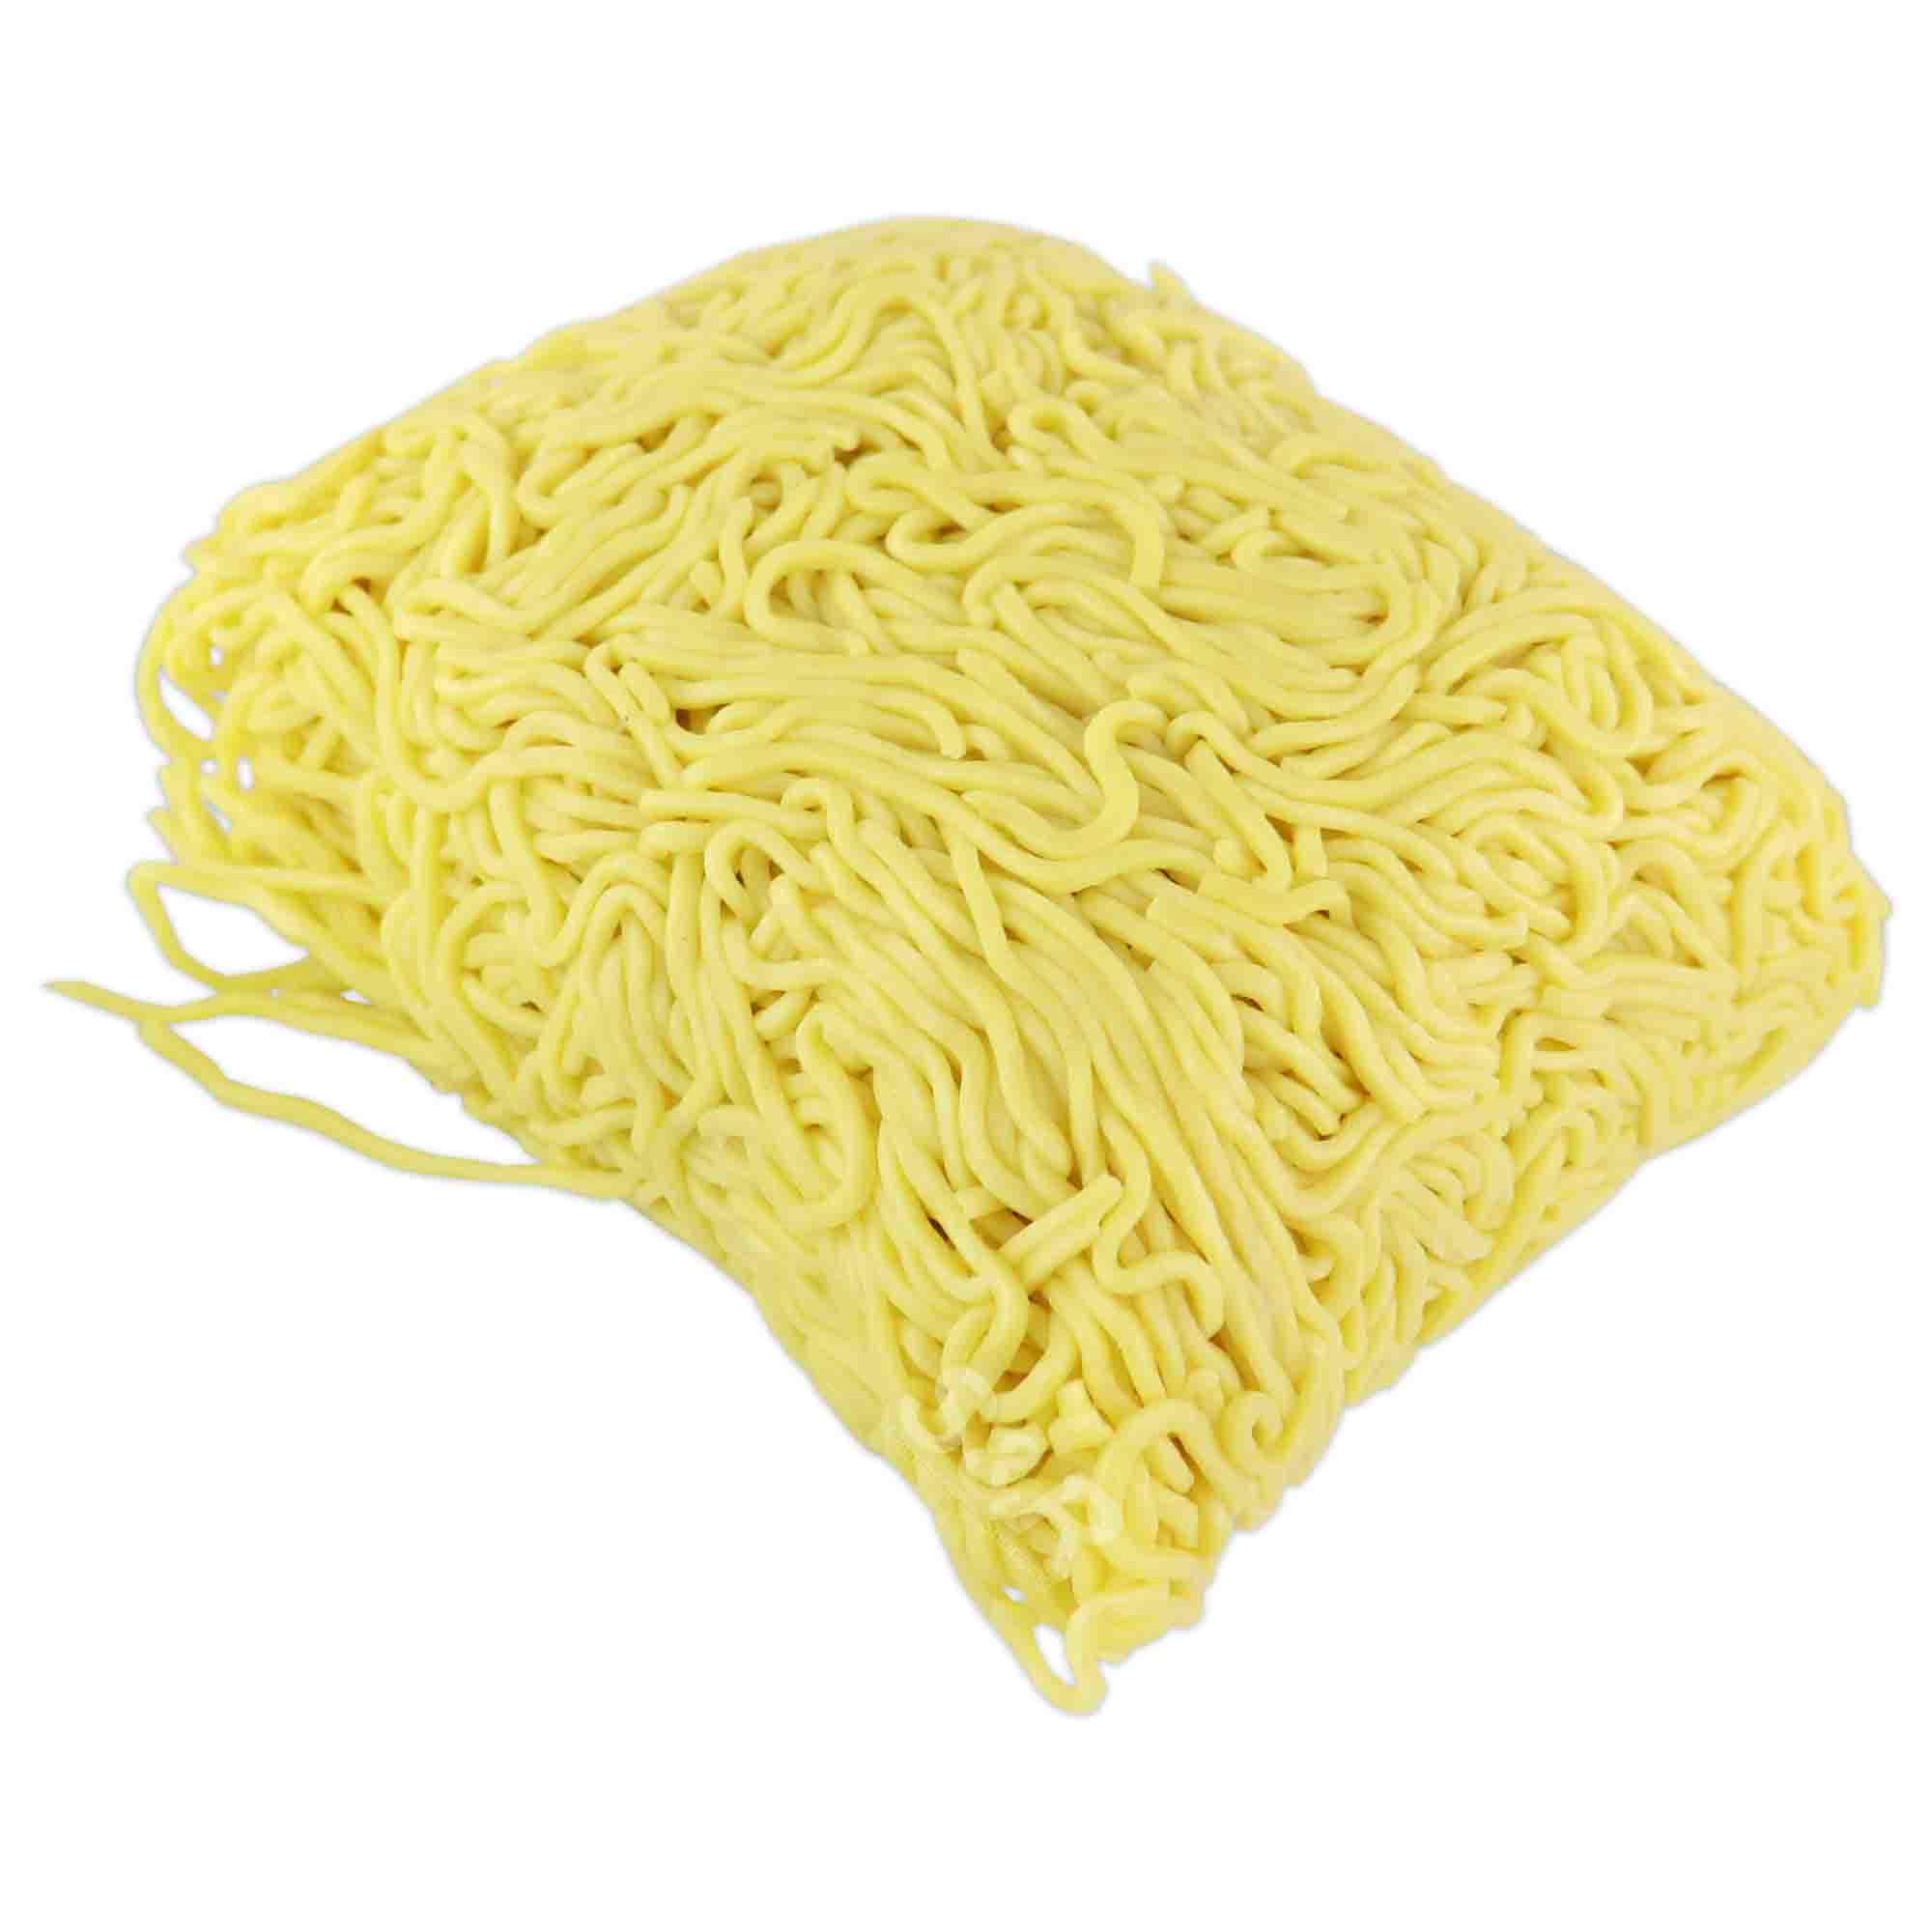 S&R Fresh Round Noodles approx. 1kg